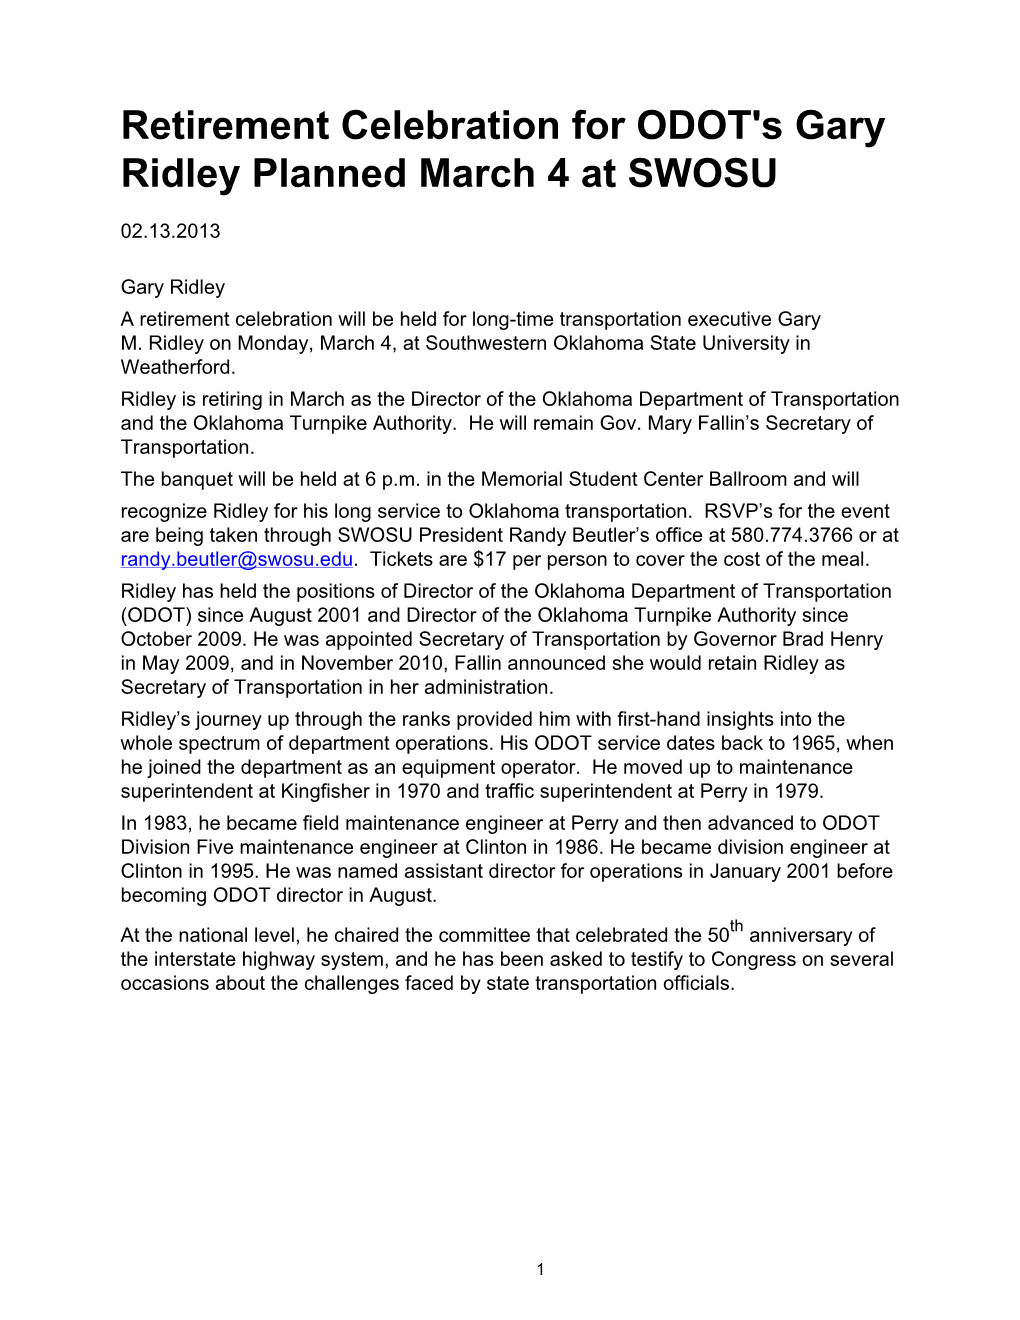 Retirement Celebration for ODOT's Gary Ridley Planned March 4 at SWOSU